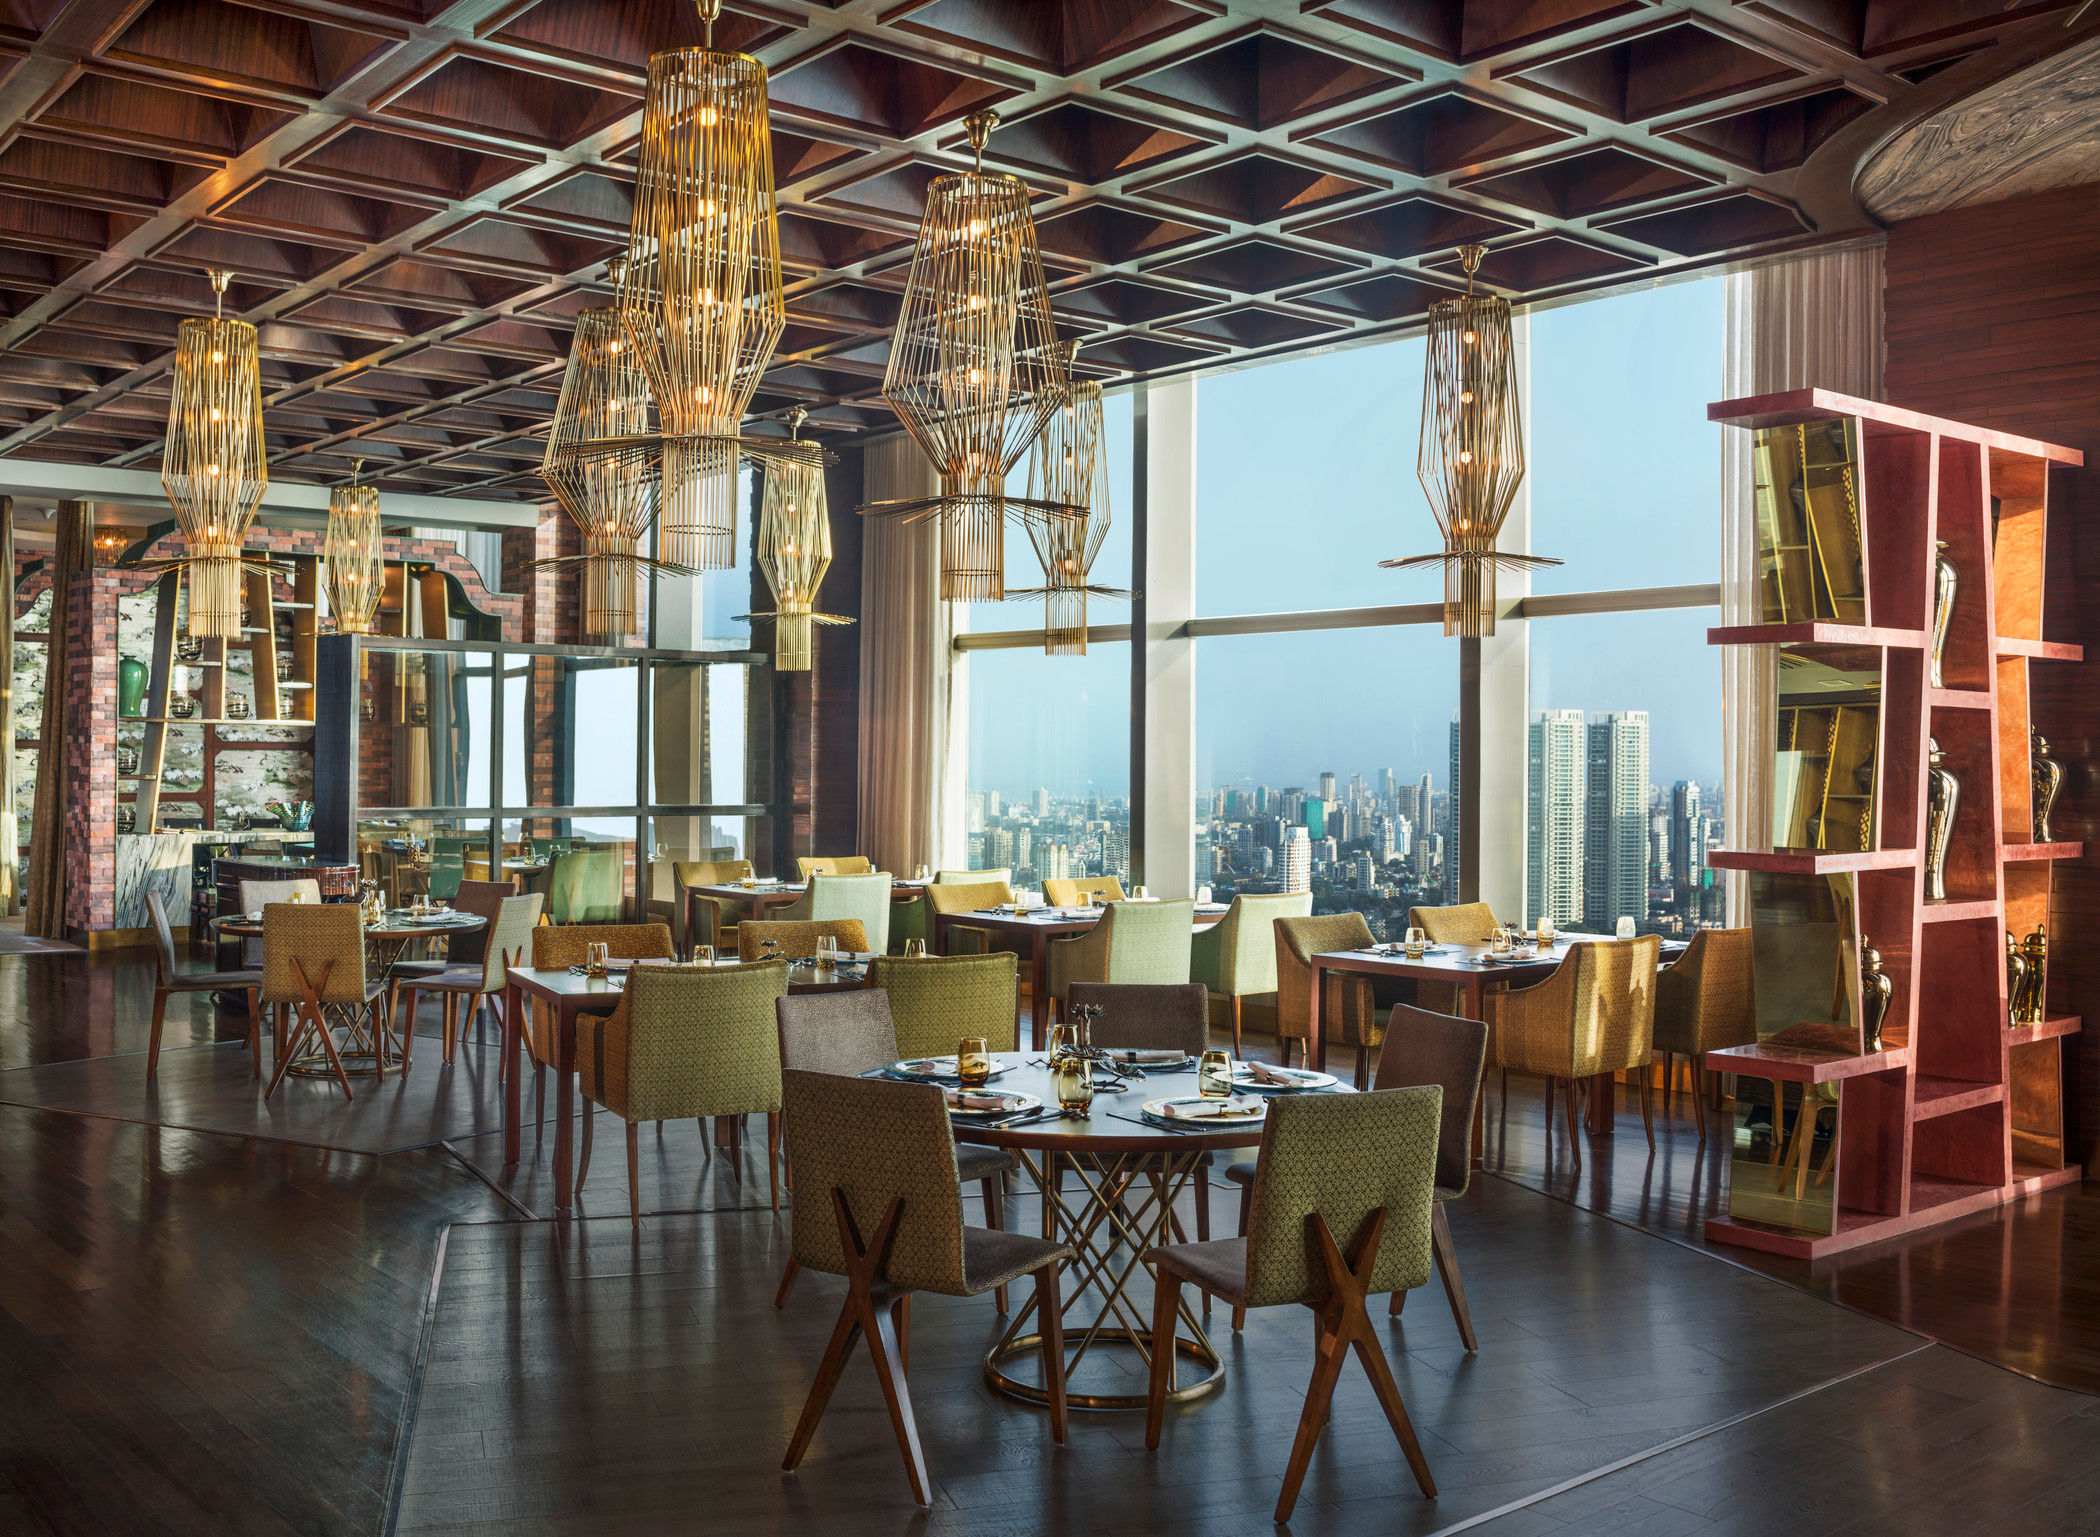 By the Mekong, The St. Regis Mumbai has a new menu, and here’s what to try